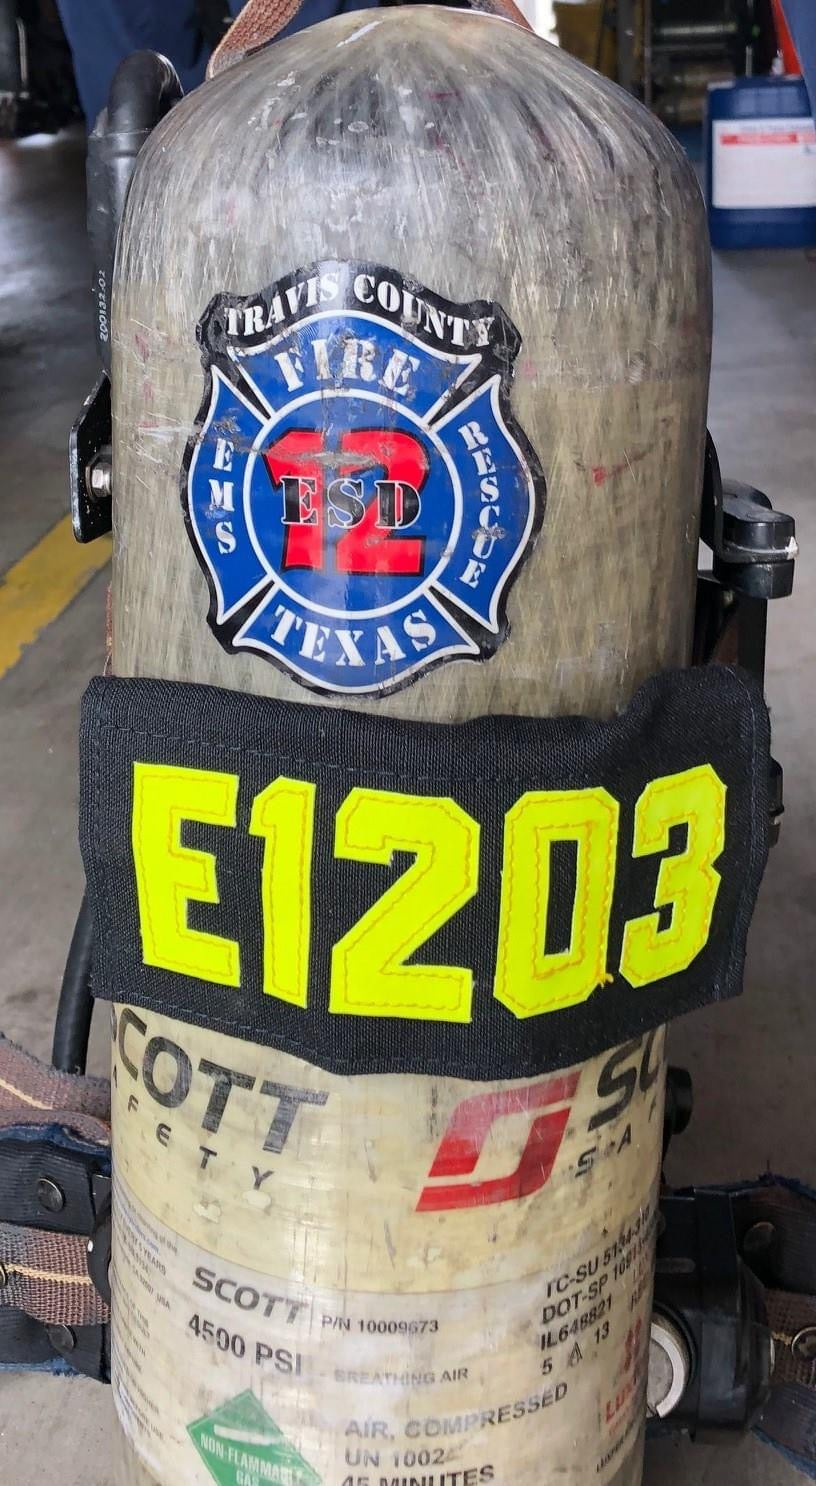 Personalized SCBA Tag/ID | The Fire Center | The Fire Store | Store | Fuego Fire Center | SCBA Identifiers, Company ID's or plain Identifiers. Readily identify all company members at an incident. Two sizes available that work on most SCBA straps. Small:7.5" X 3.5" with 2 inch letters. Large: 8" X 4.5" with 3 inch letters.